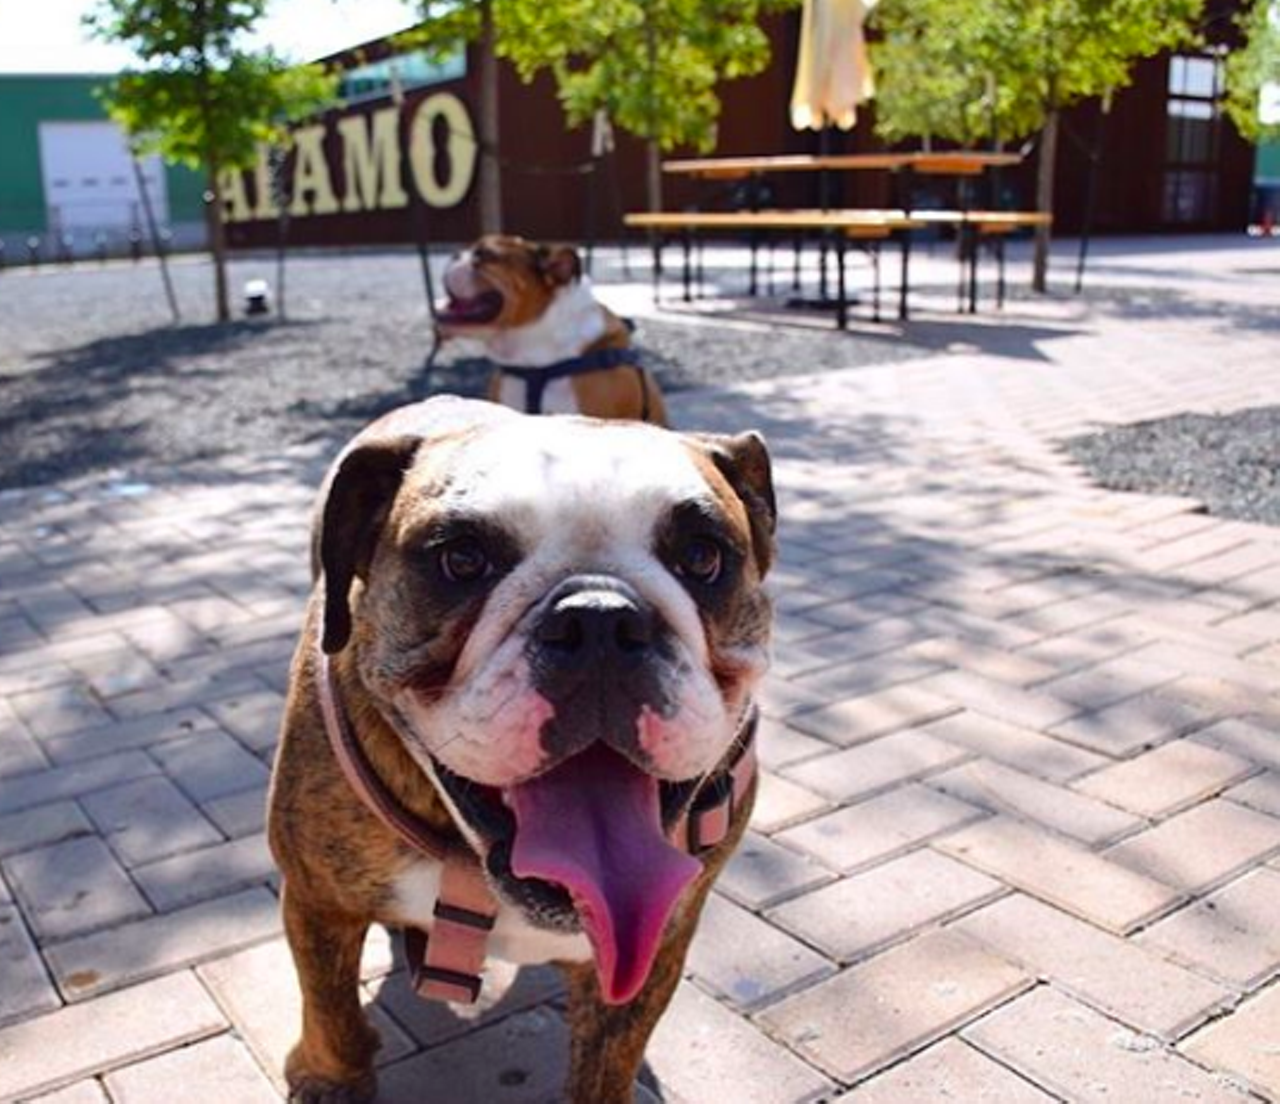 Alamo Beer Company
202 Lamar, (210) 872-5589, alamobeer.com
Consider Alamo Beer’s outdoor space free reign for you and your pup. Complete with picnic tables and cornhole, you’ll have endless fun running around with your furry friend – at least as long as you know your limit.
Photo via Instagram / alamobeerco